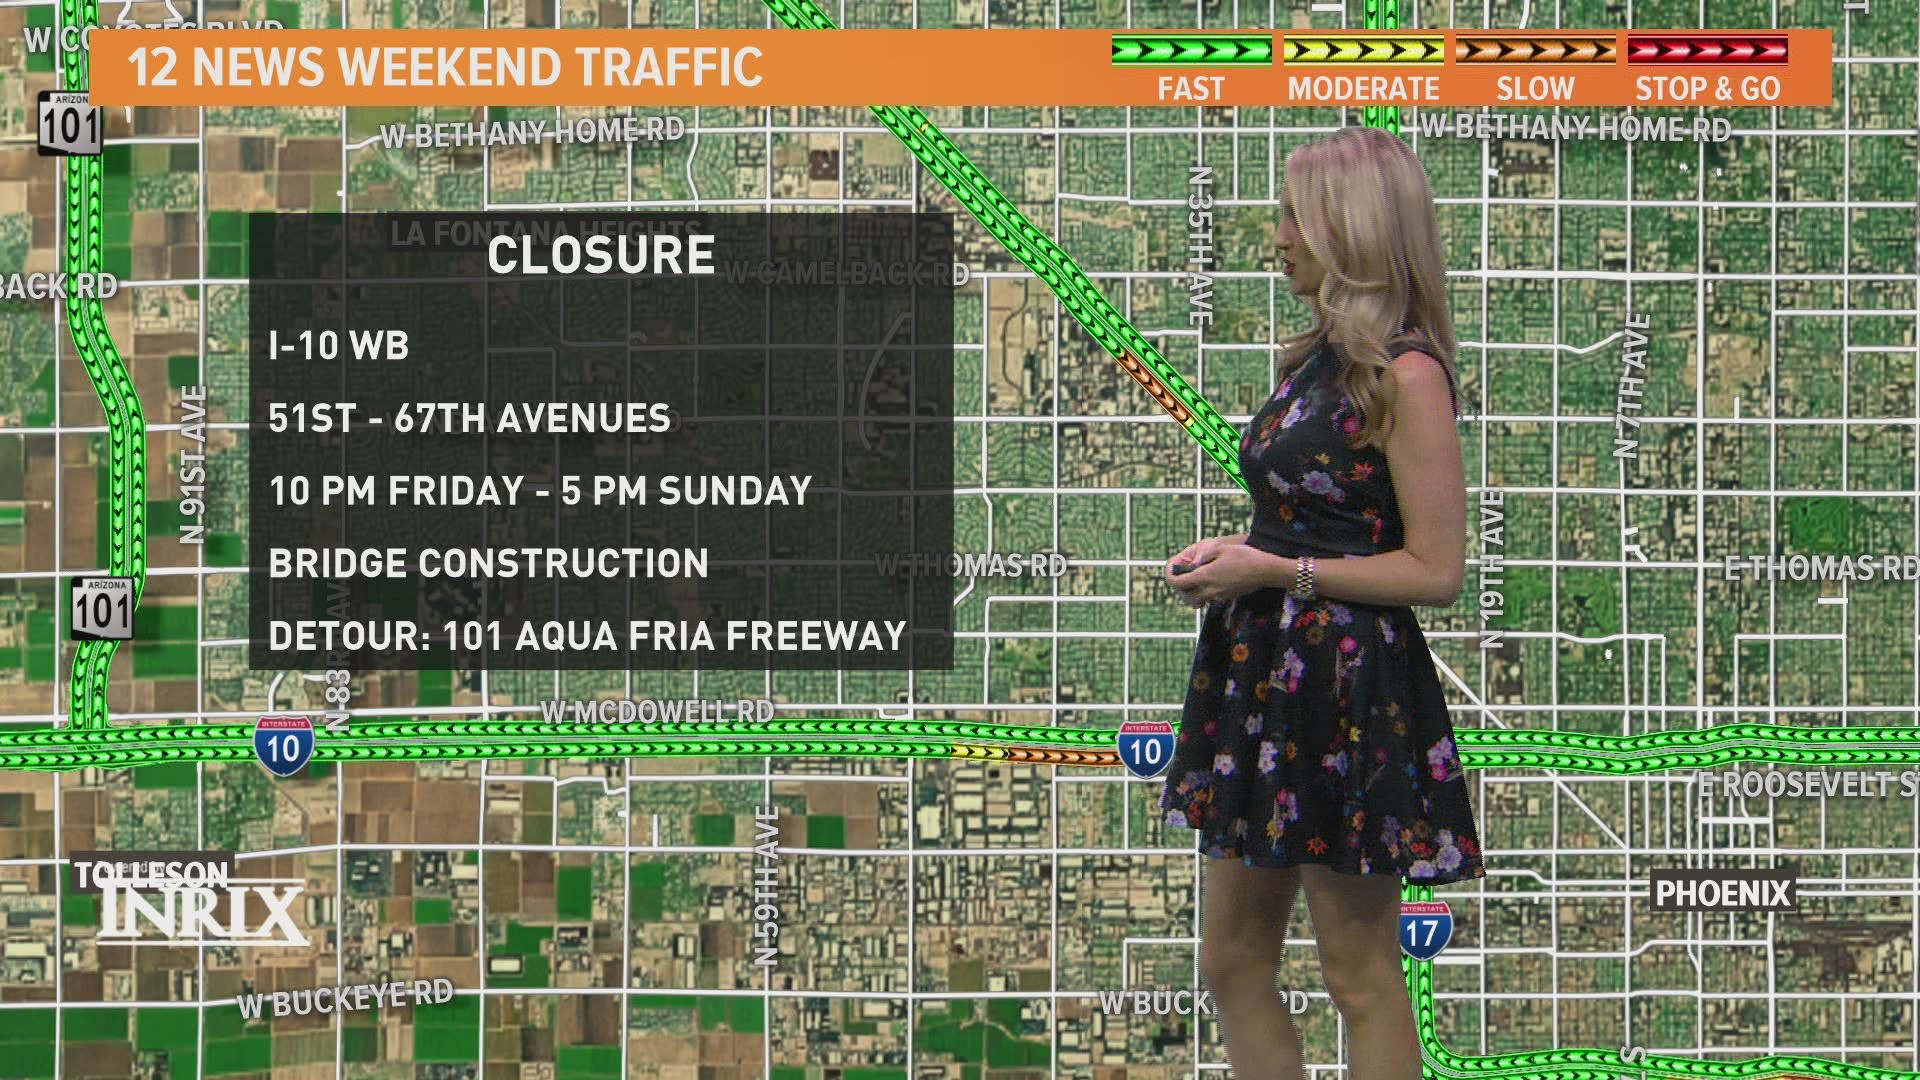 Here's your weekend traffic outlook for June 9-11